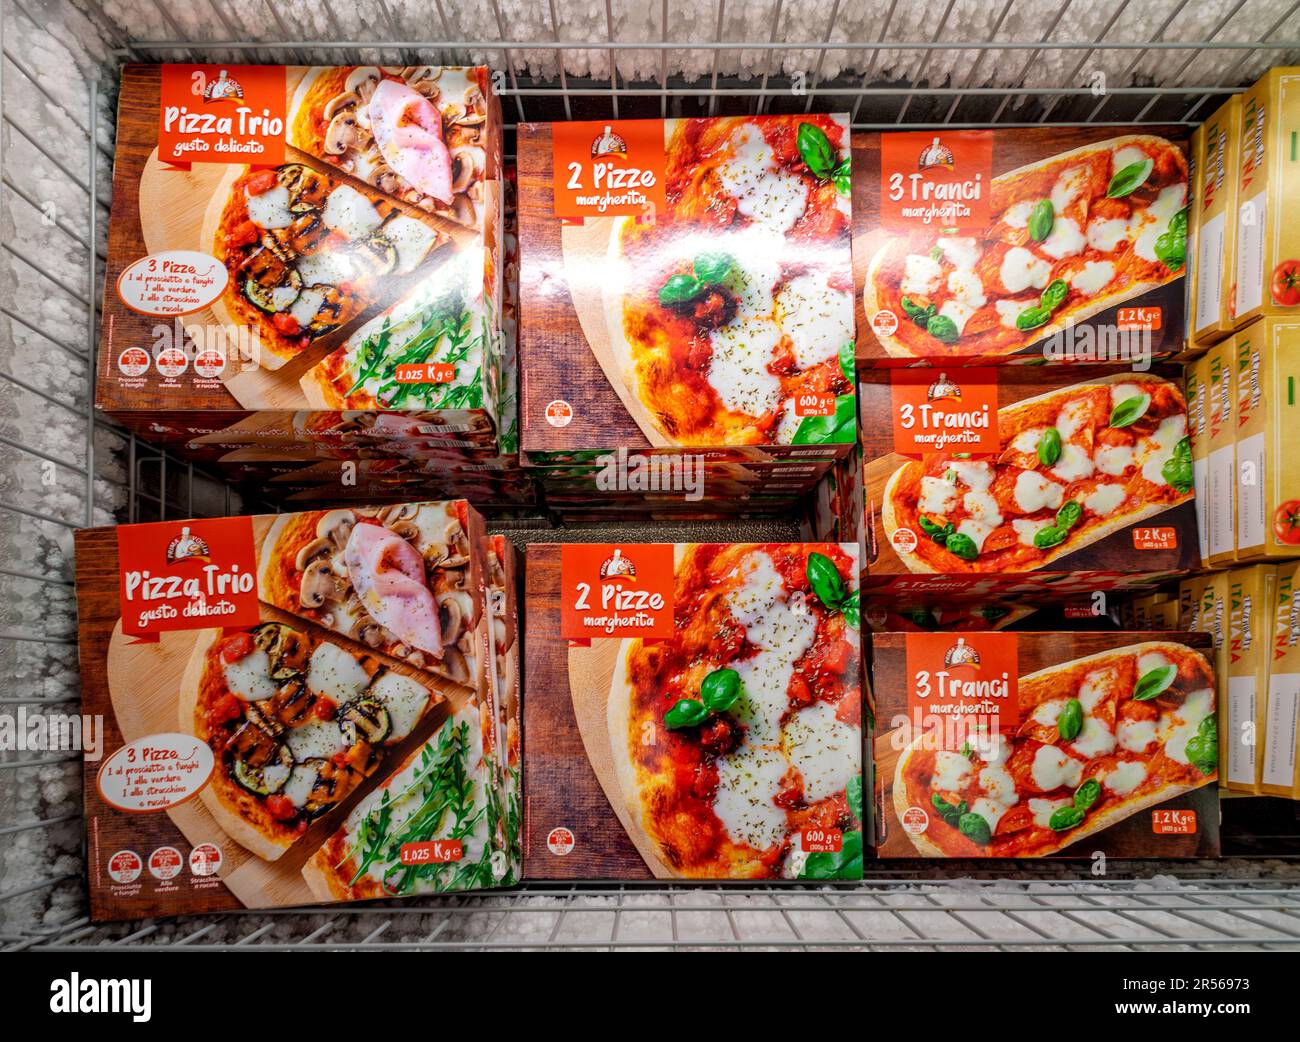 Italy - May 21, 2023: Frozen pre-cooked pizzas in cardboard box decorated with eye-catching photos of pizzas for sale in Italian supermarket refrigera Stock Photo